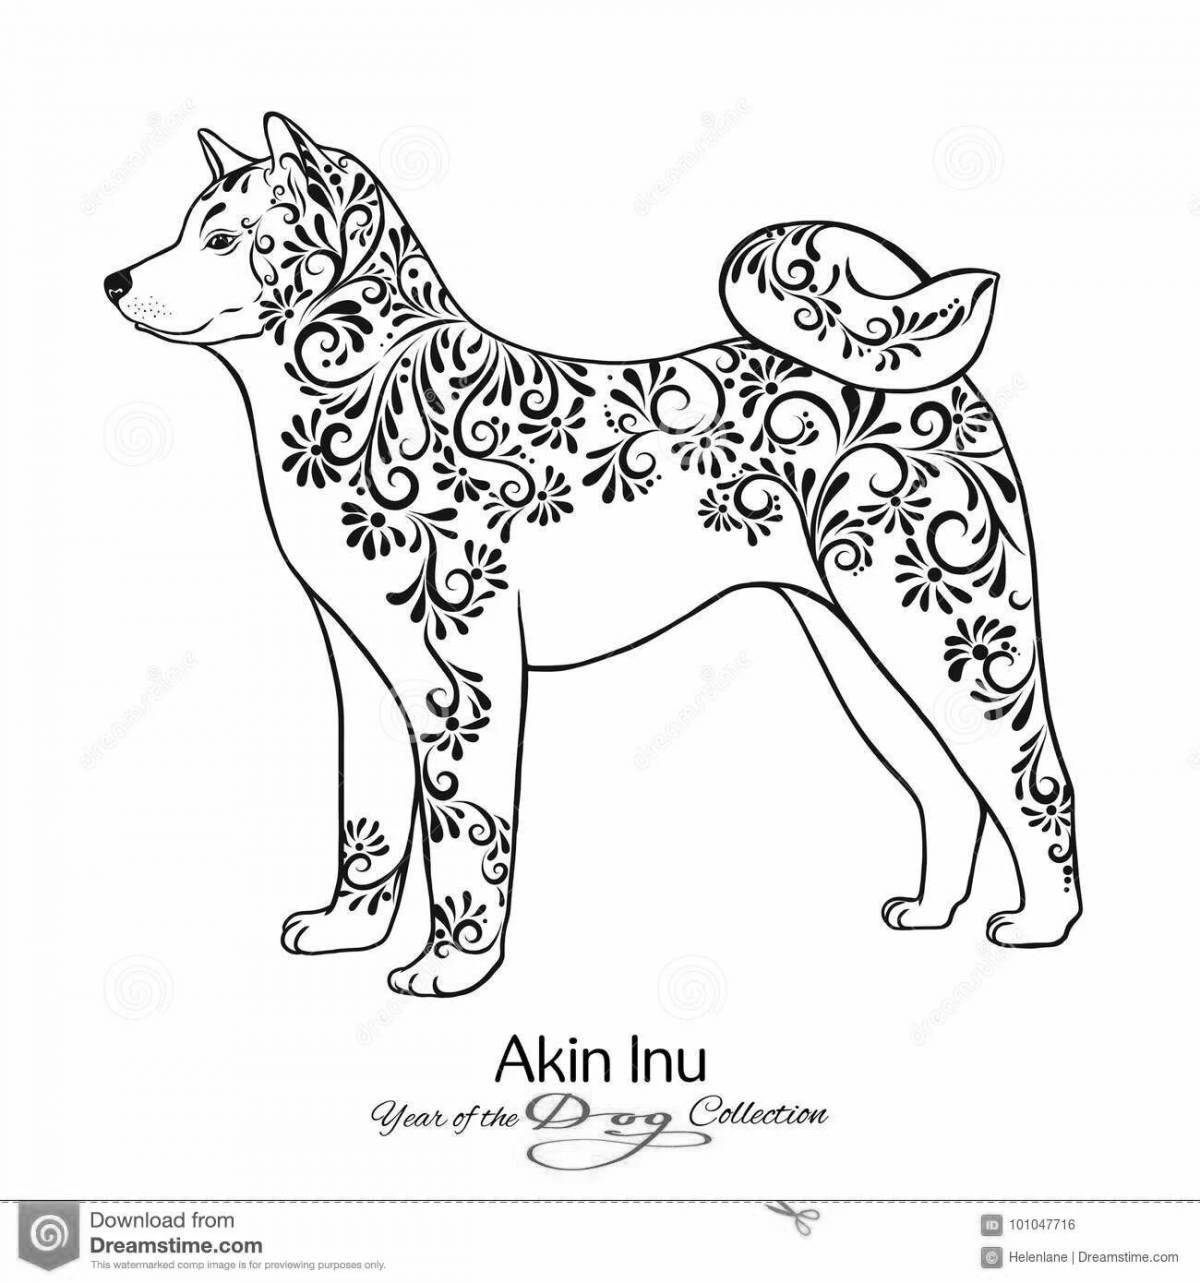 Animated hachiko coloring page